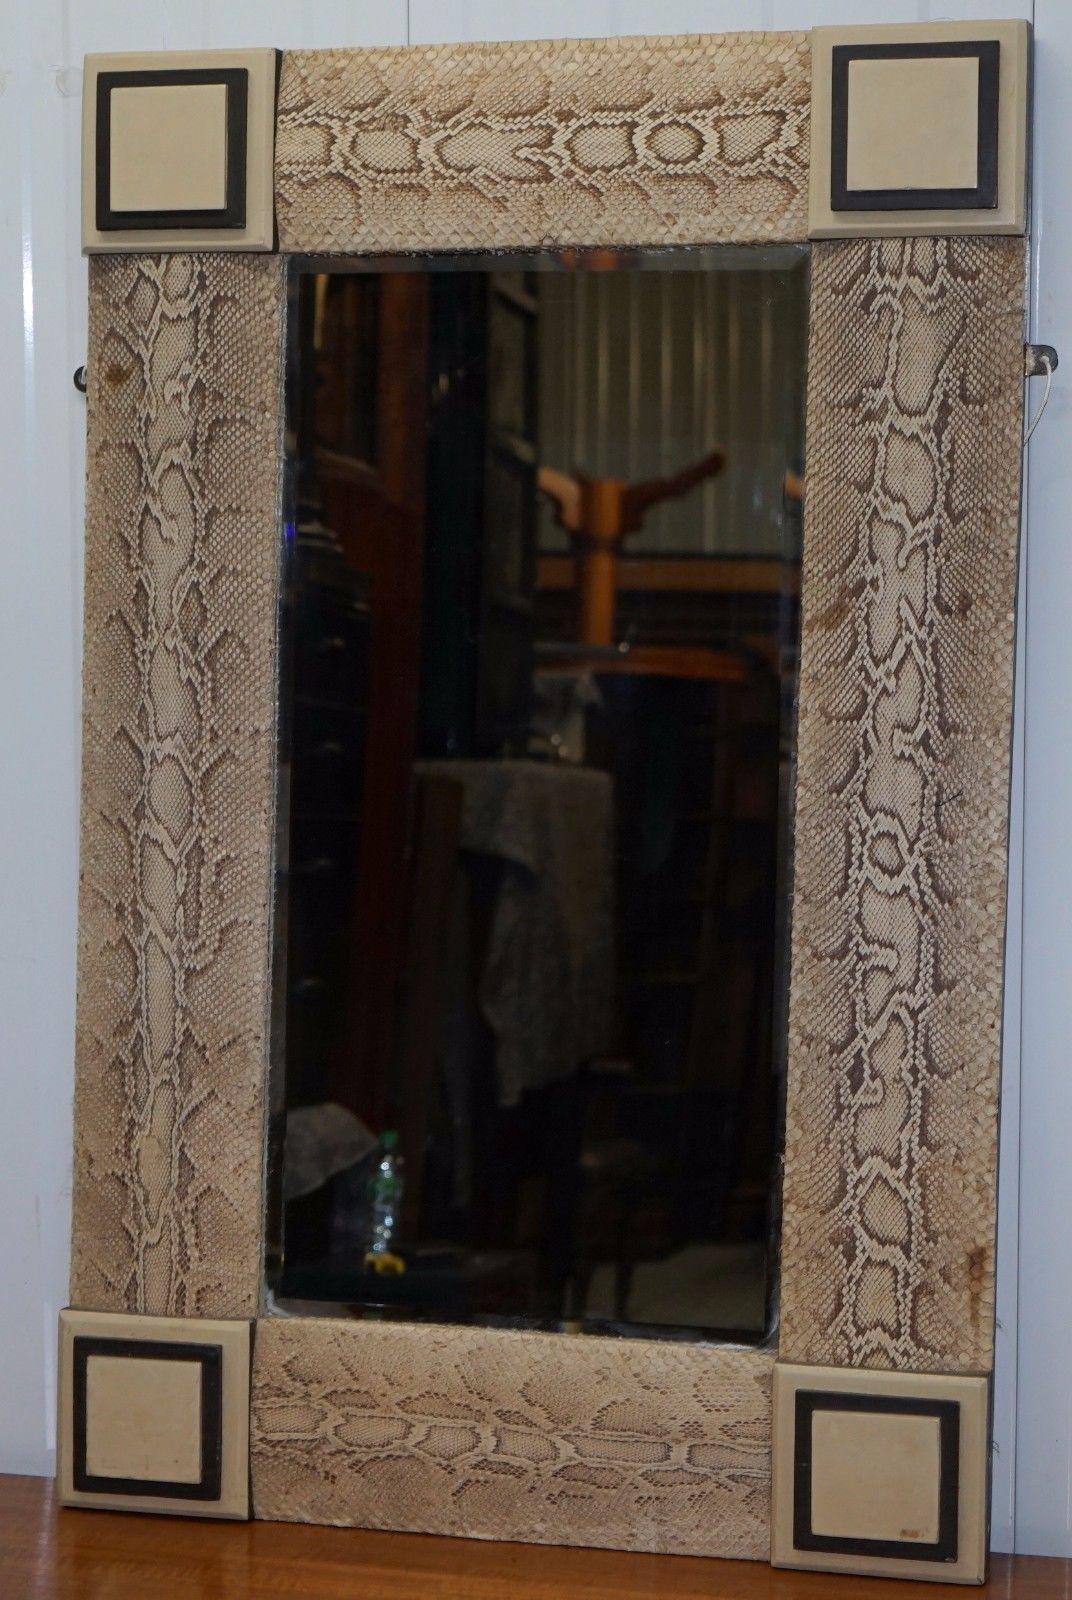 We are delighted to offer for sale this lovely handmade Snakeskin covered antique timber framed mirror

This sold to me as being purchased from Versace however in the absents of their label I’m not listing it as such. The condition is excellent,